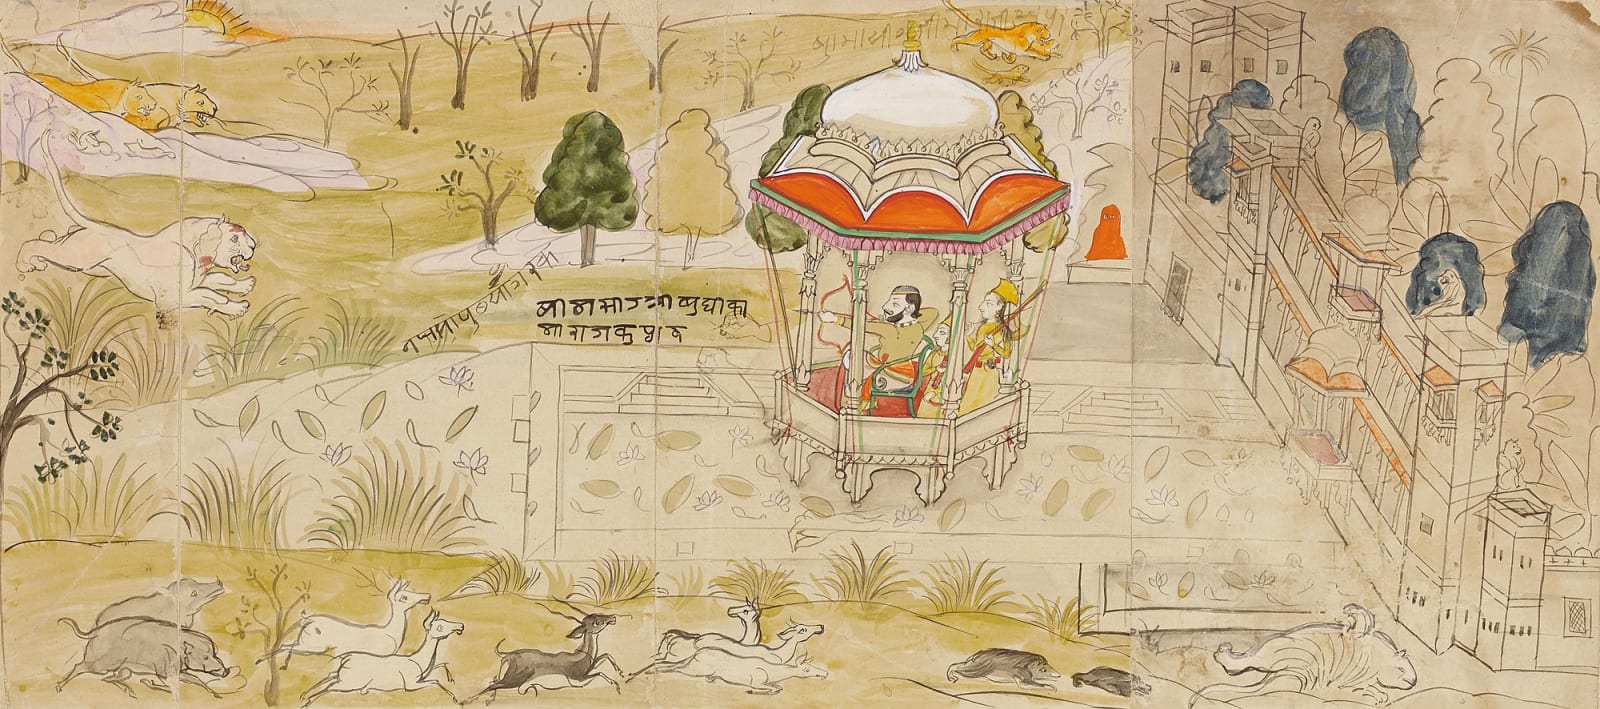 A Raja hunting Lions outside a Palace, Kotah, mid-19th century